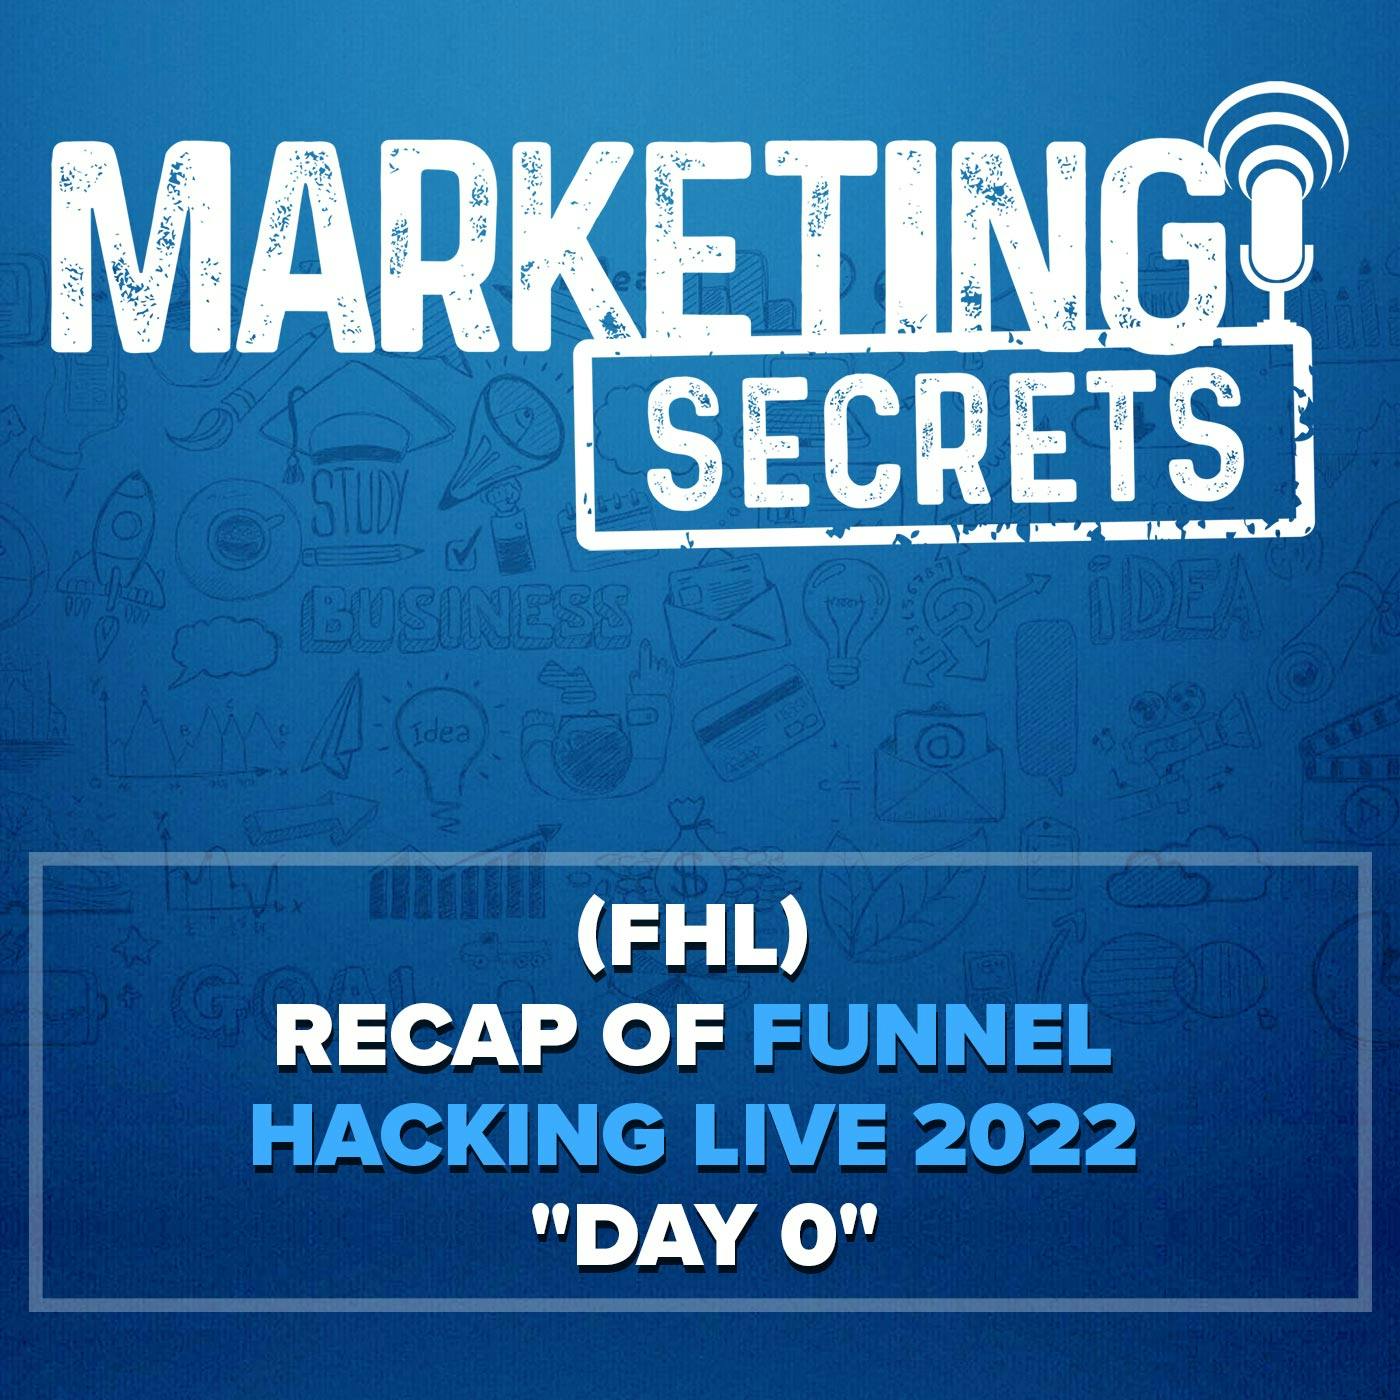 (FHL) Recap of Funnel Hacking Live 2022 ”Day 0”